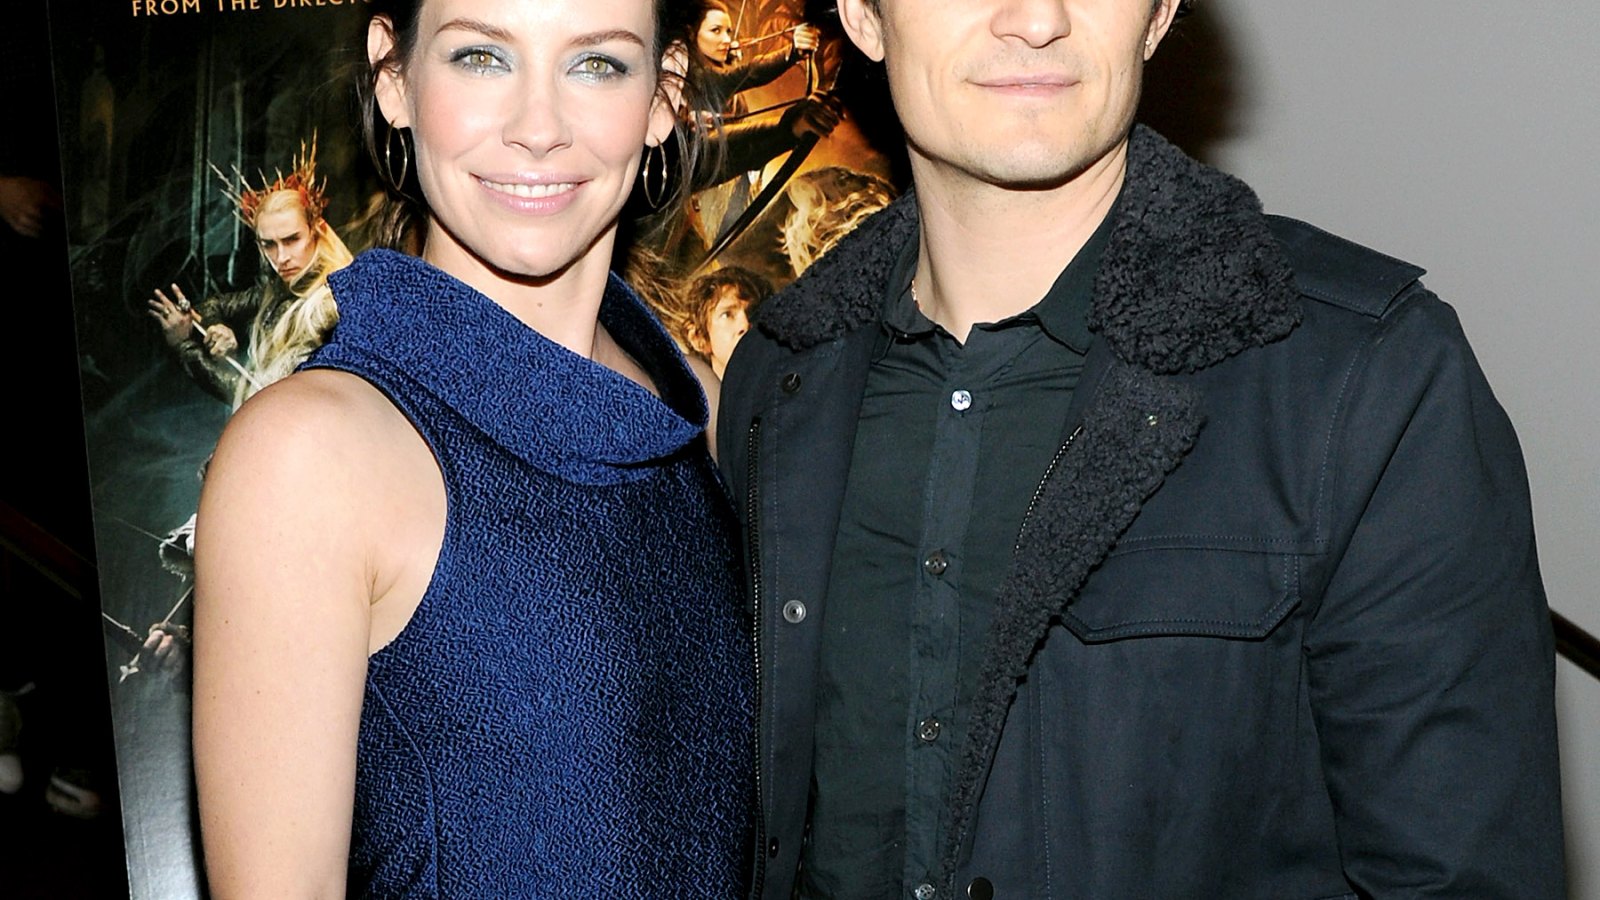 Evangeline Lilly and Orlando Bloom on December 11, 2013 in NYC